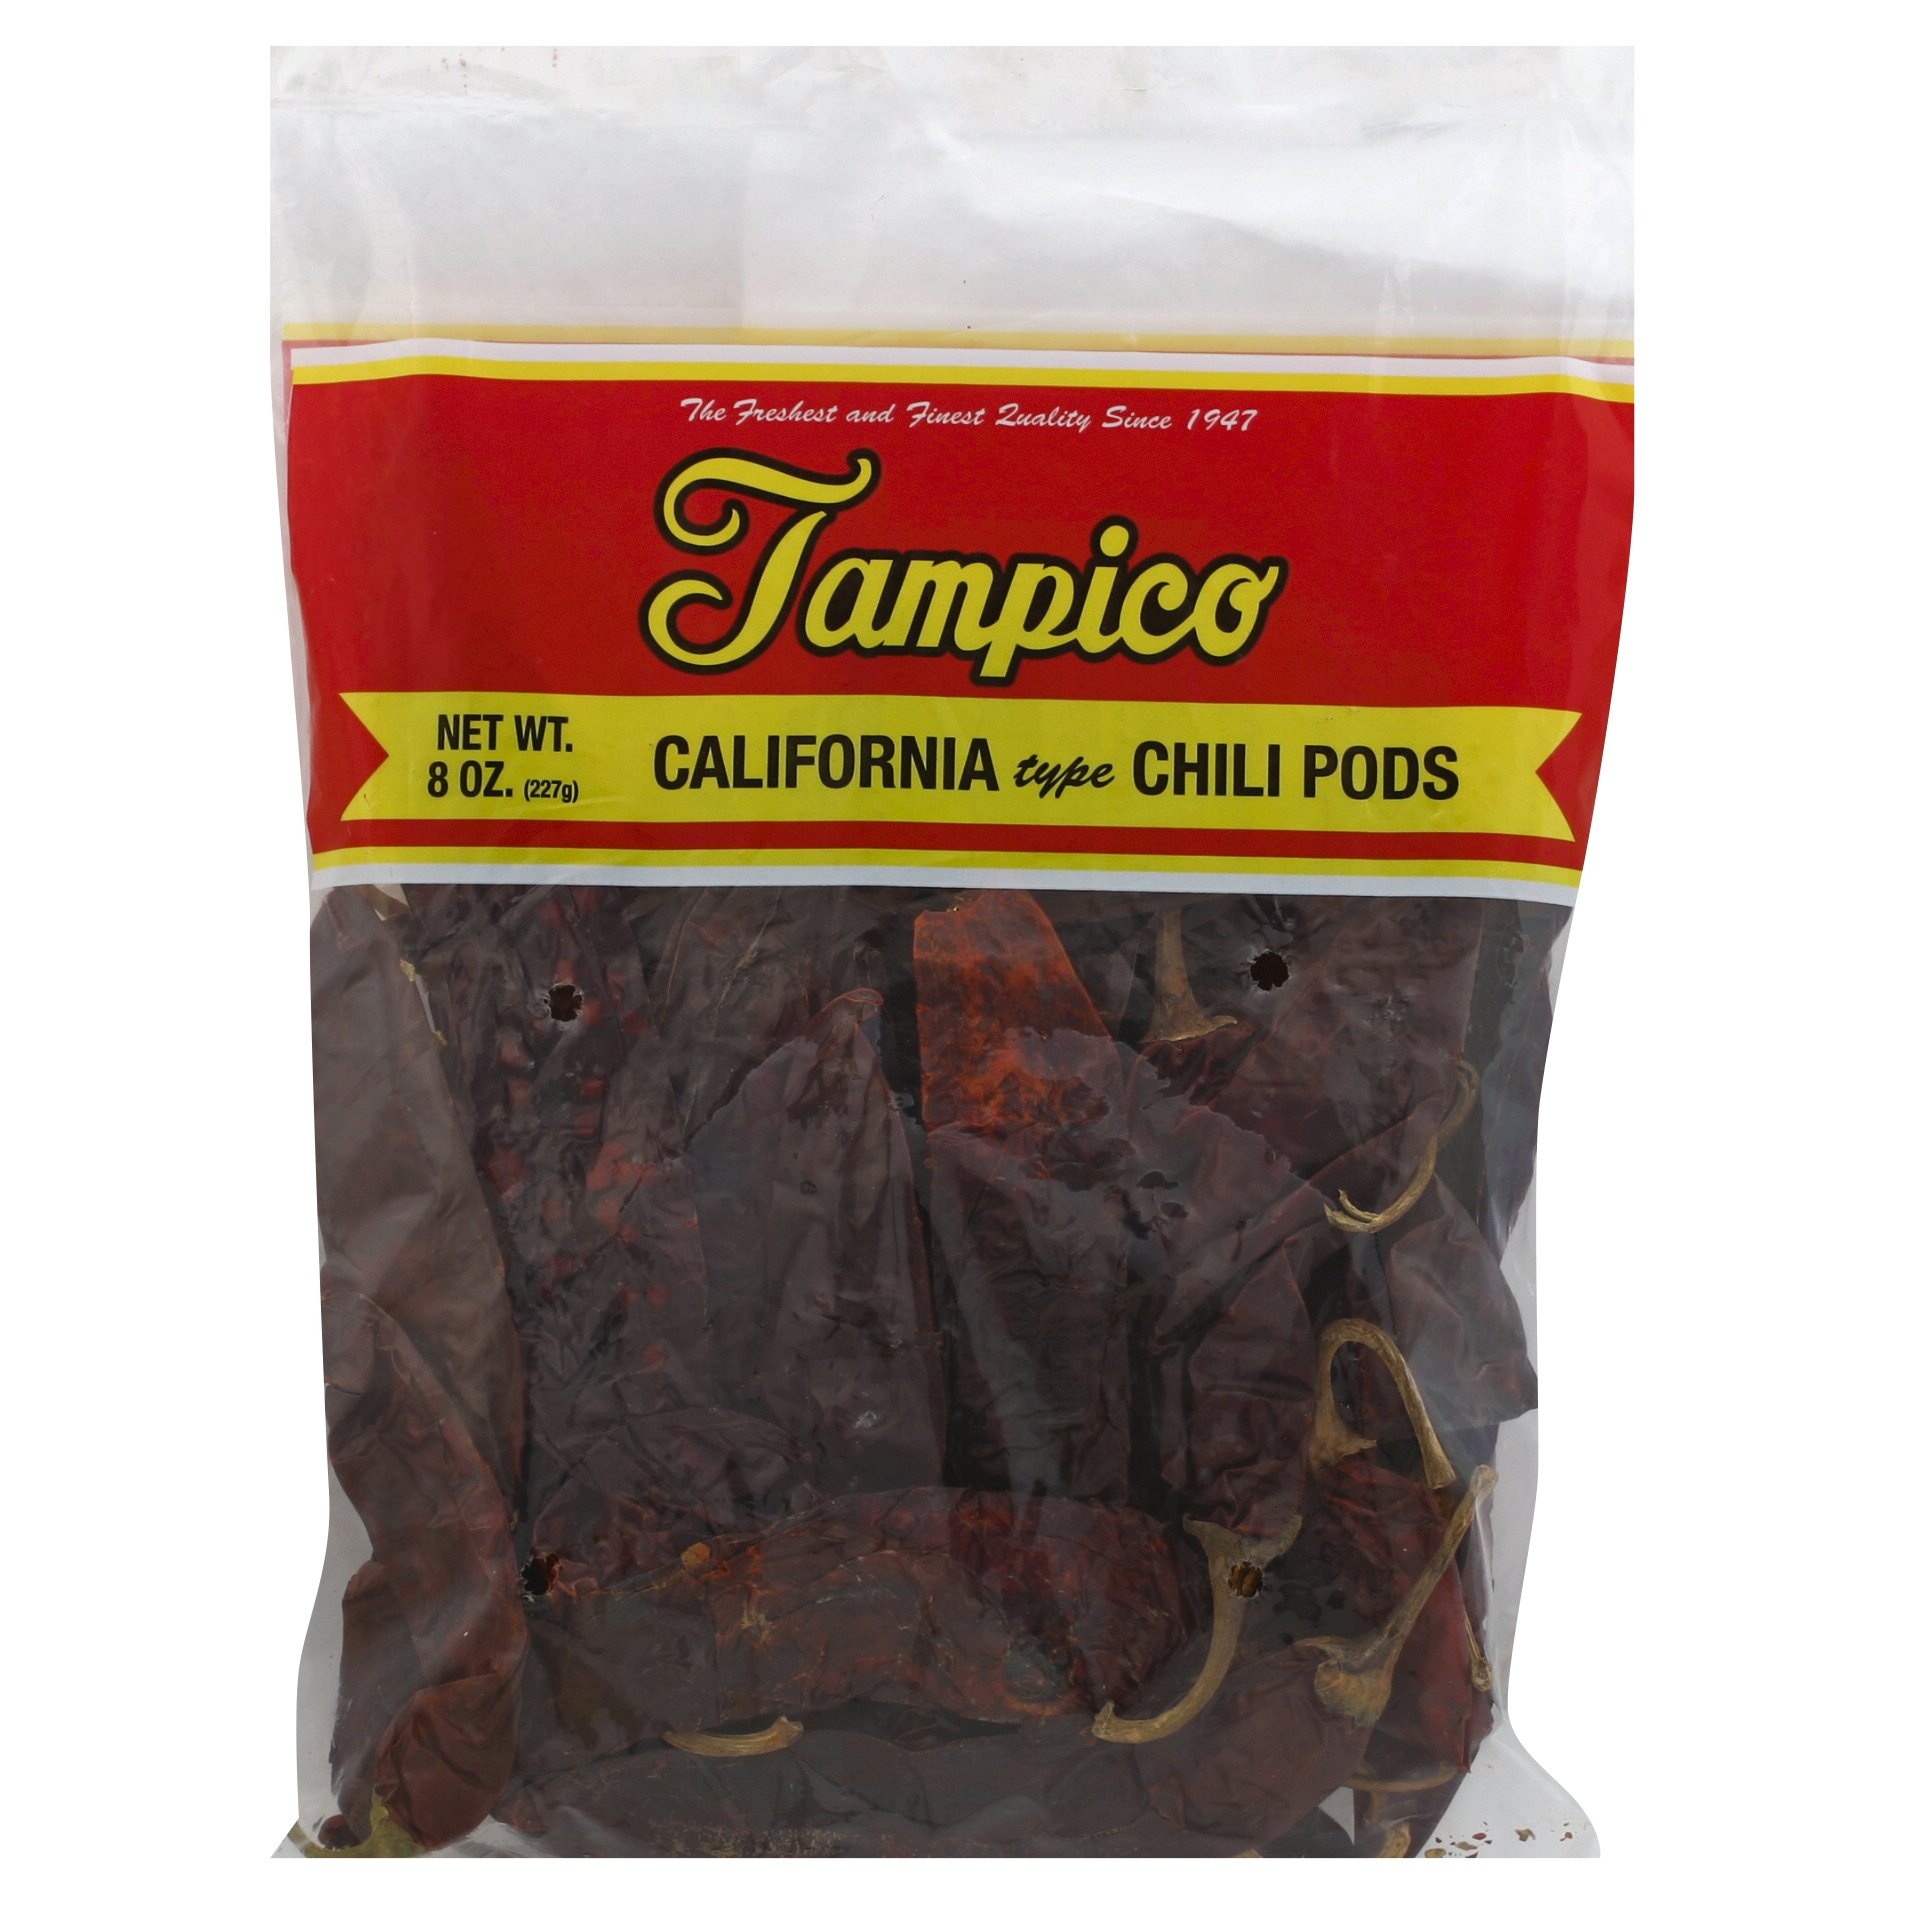 slide 1 of 1, Tampico Spices Chile Pods New Mexico, 8 oz